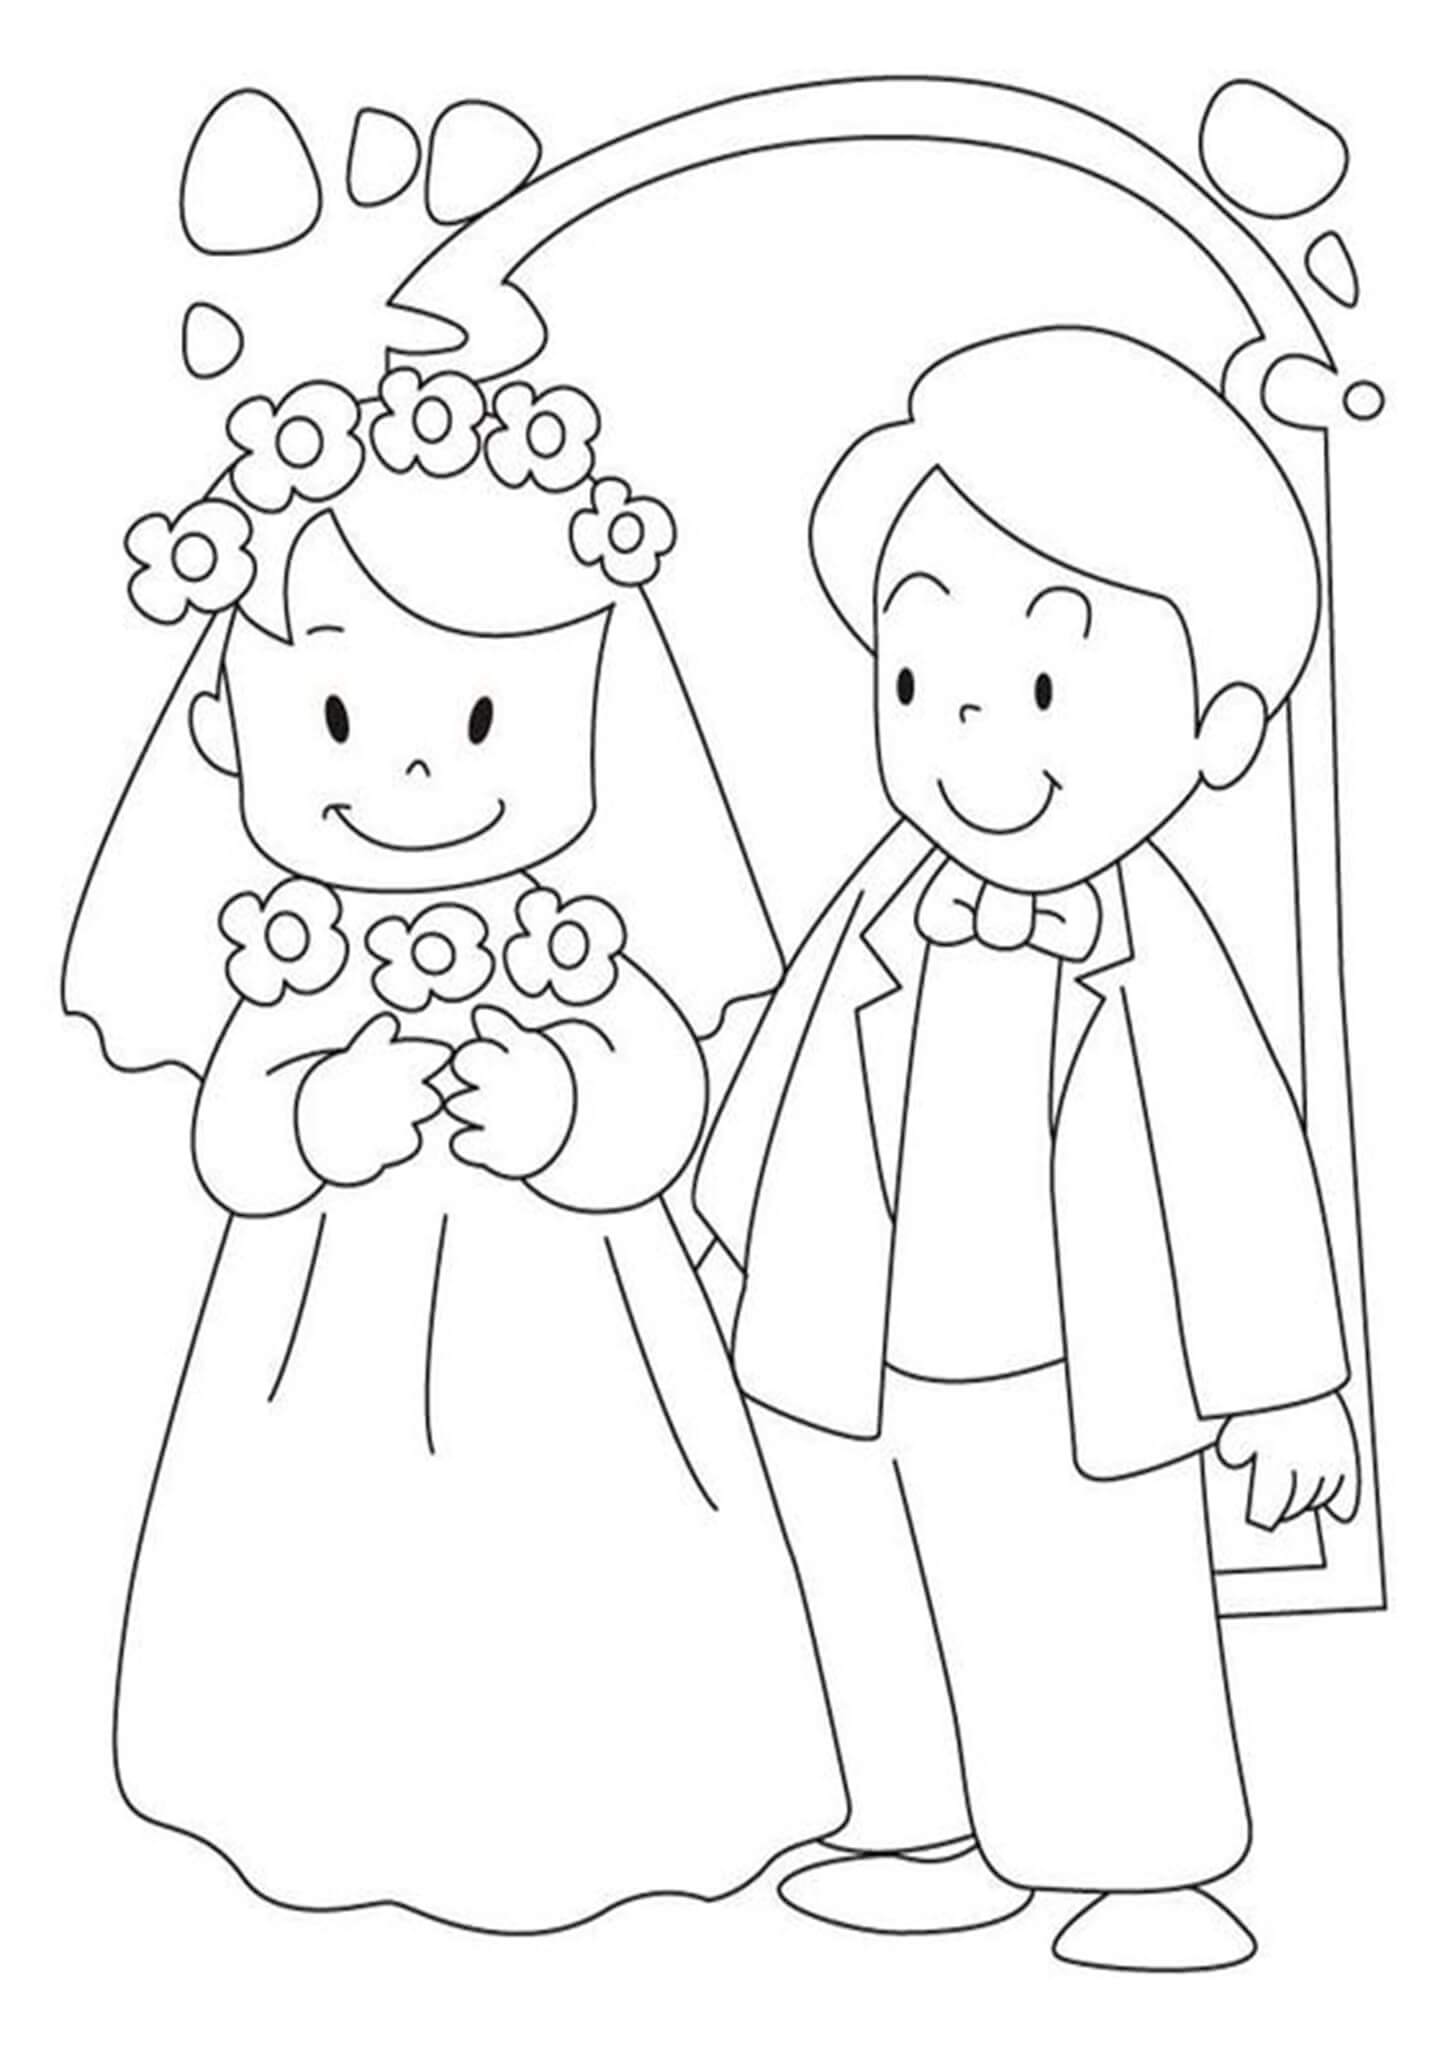 Wedding Coloring Pages Free : Wedding Coloring Pages (6) Coloring Kids ...